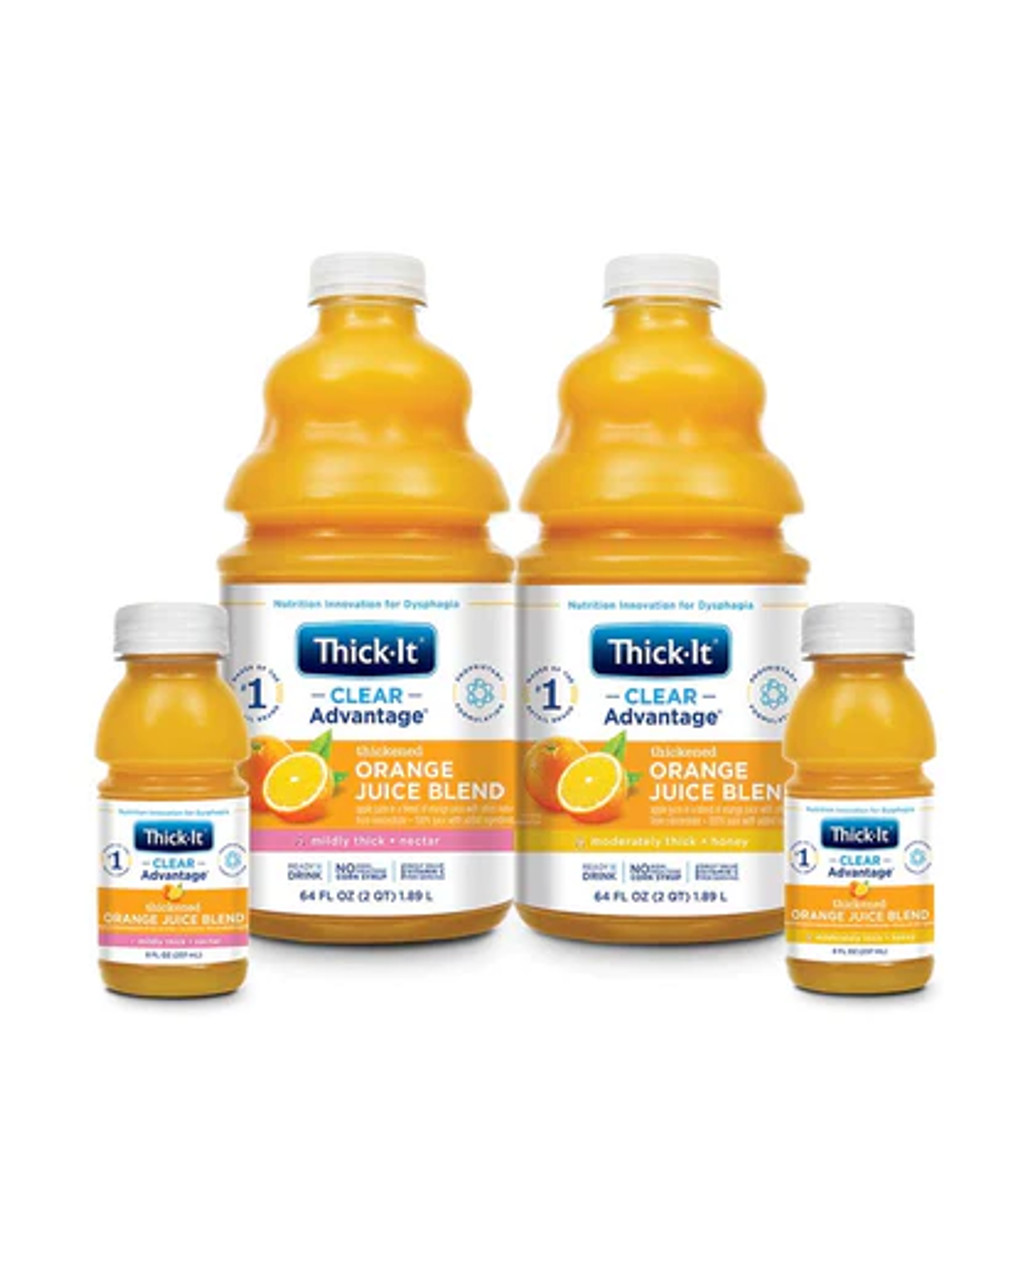 Thick-It Clear Advantage Thickened Orange Juice - Mildly Thick (Nectar) 236ml x 24 case